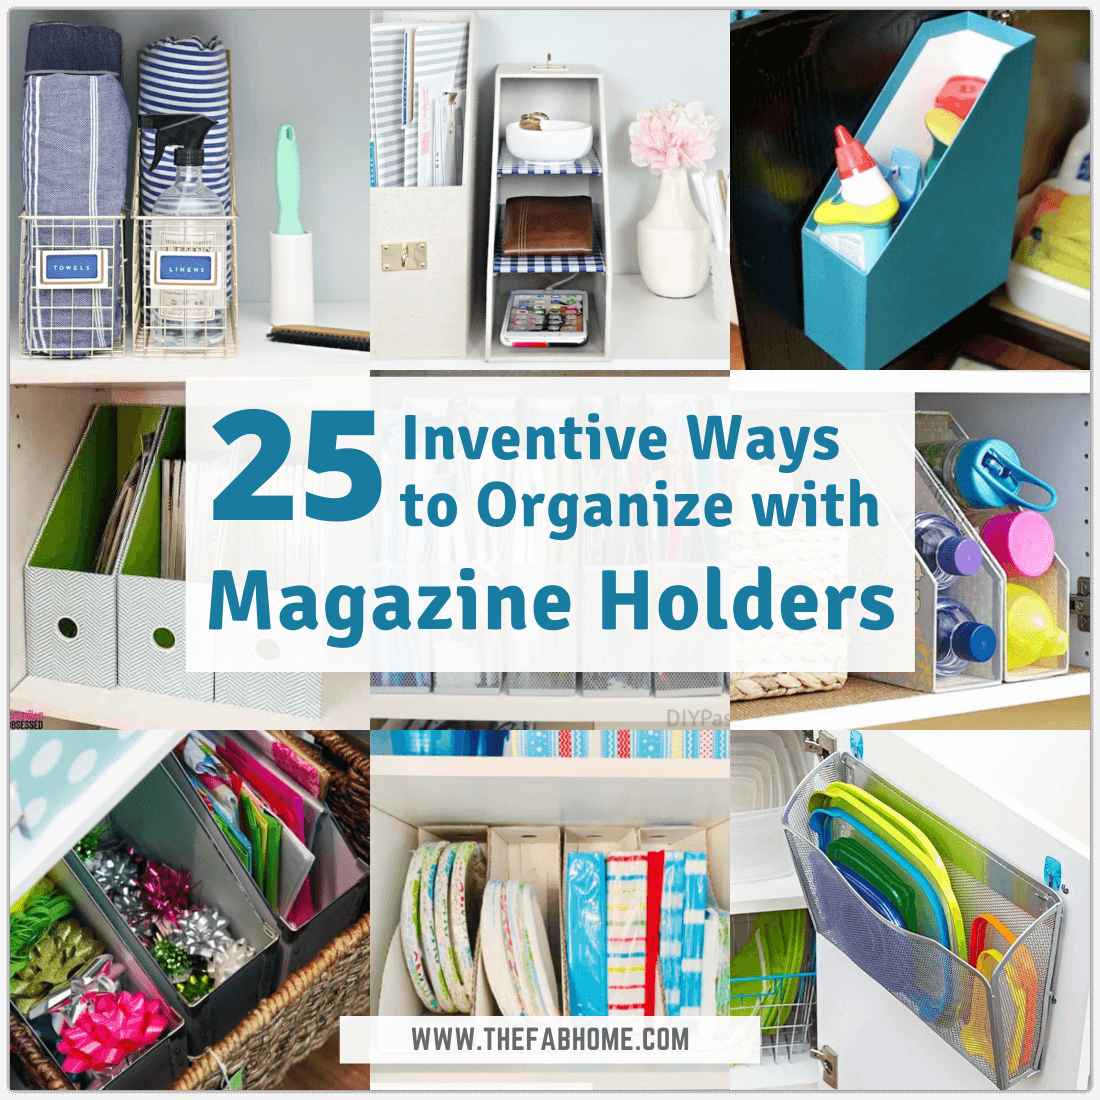 25 Inventive Ways to Organize with Magazine Holders